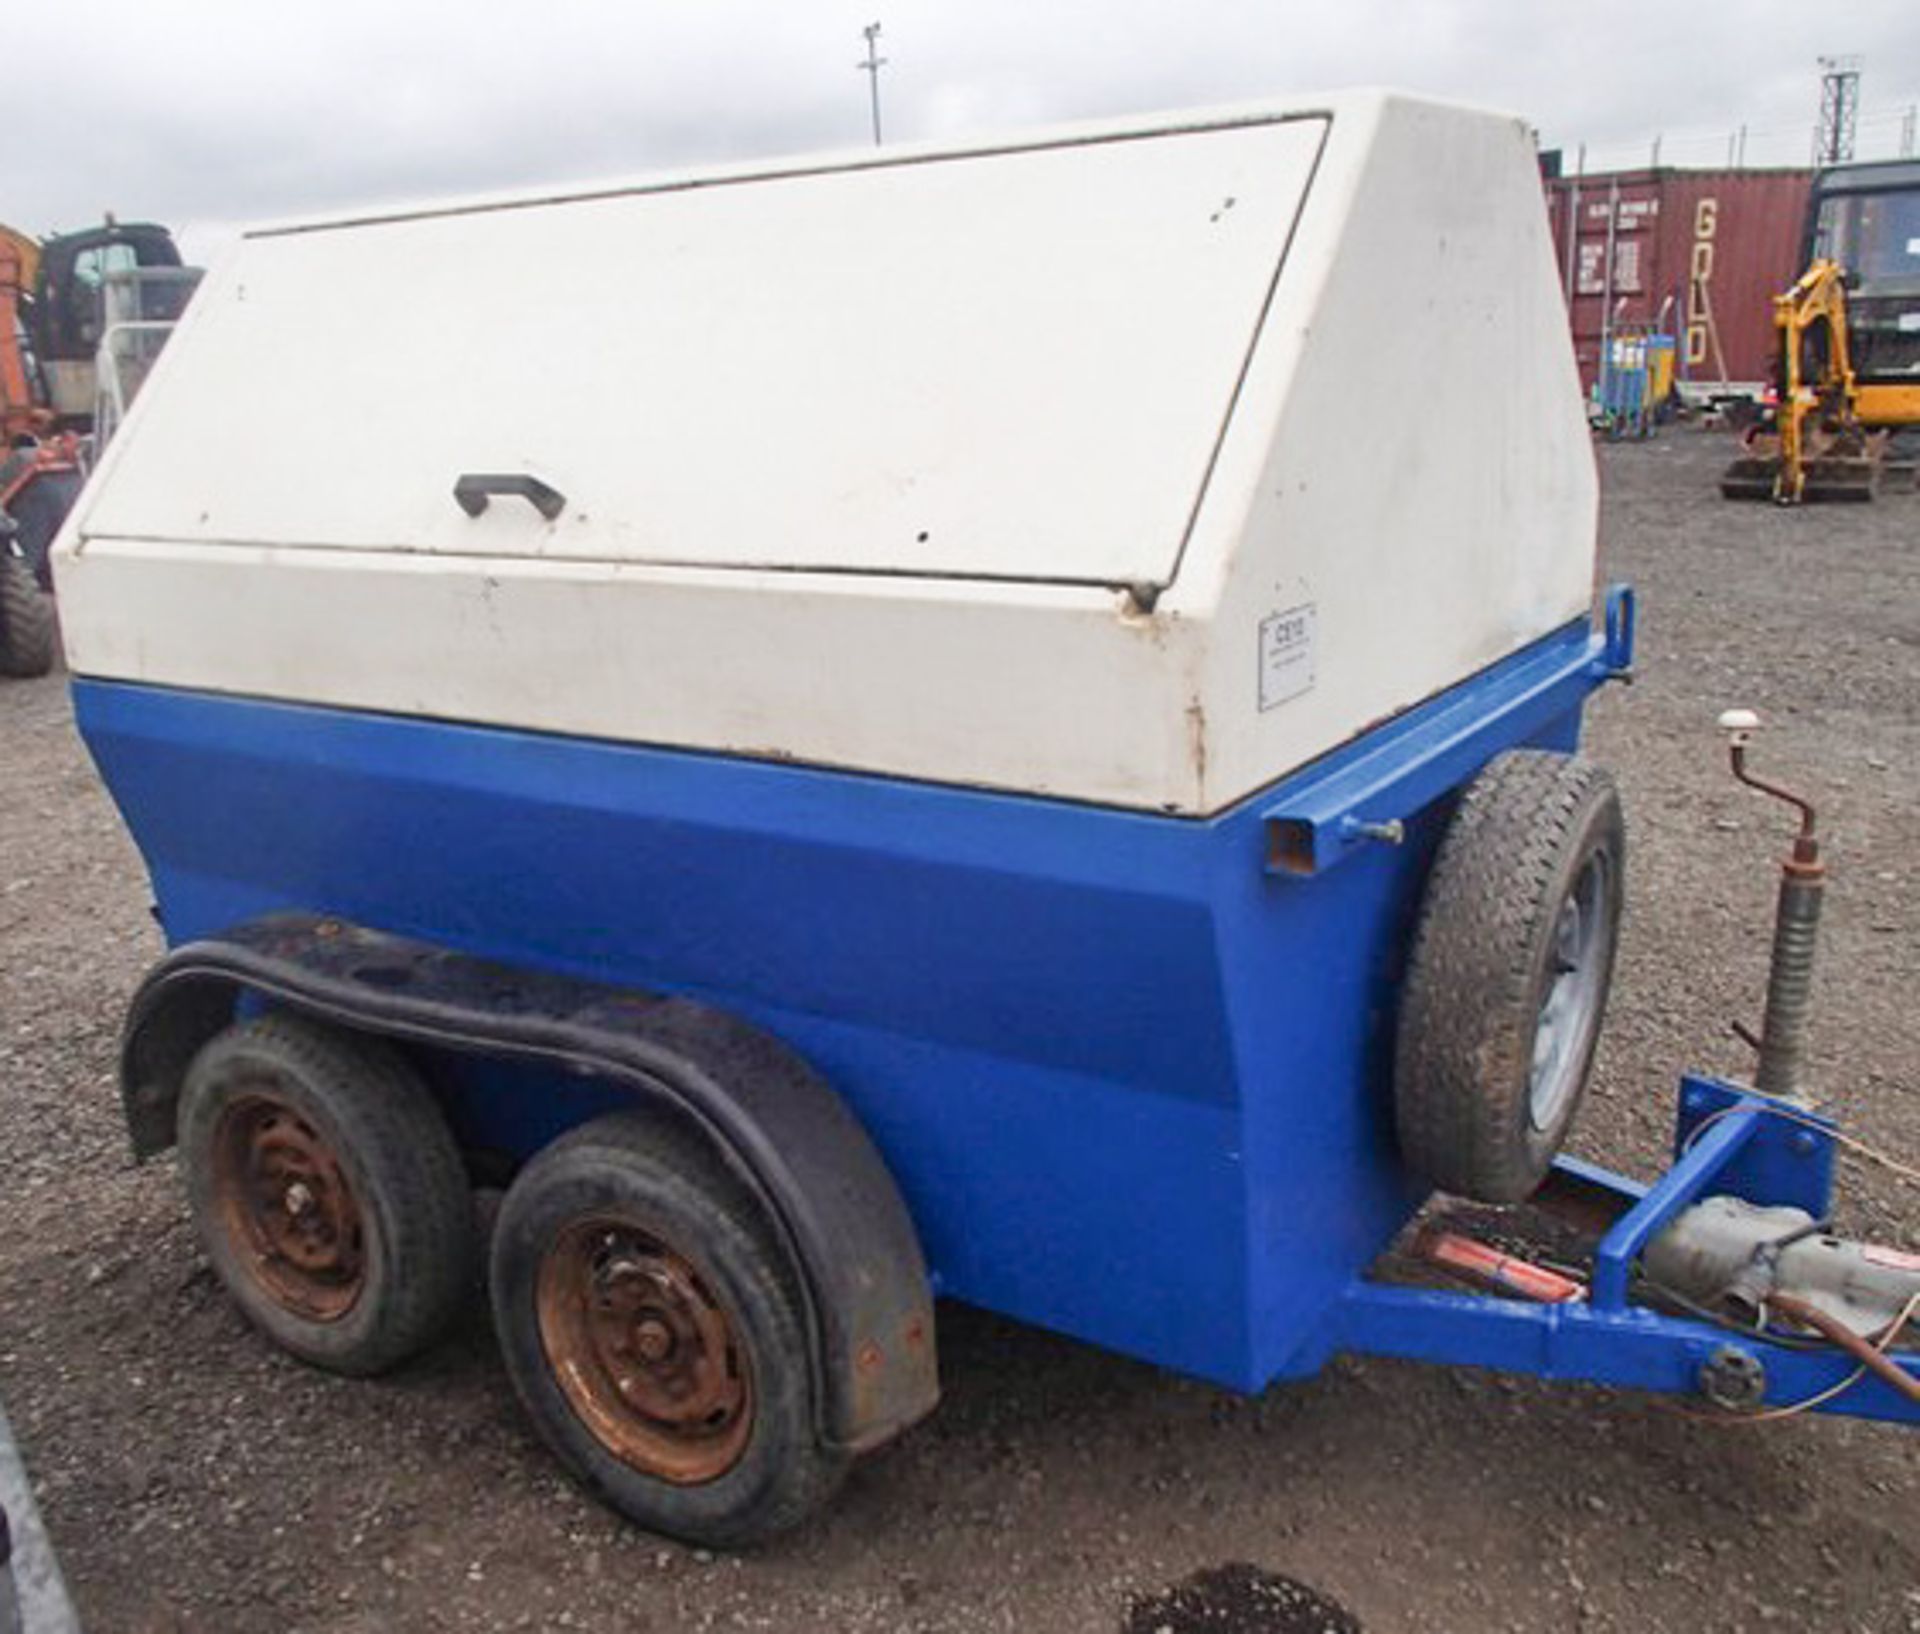 DIESEL BOWSER 1000LTRS, CAN BE TOWED - Bild 3 aus 7